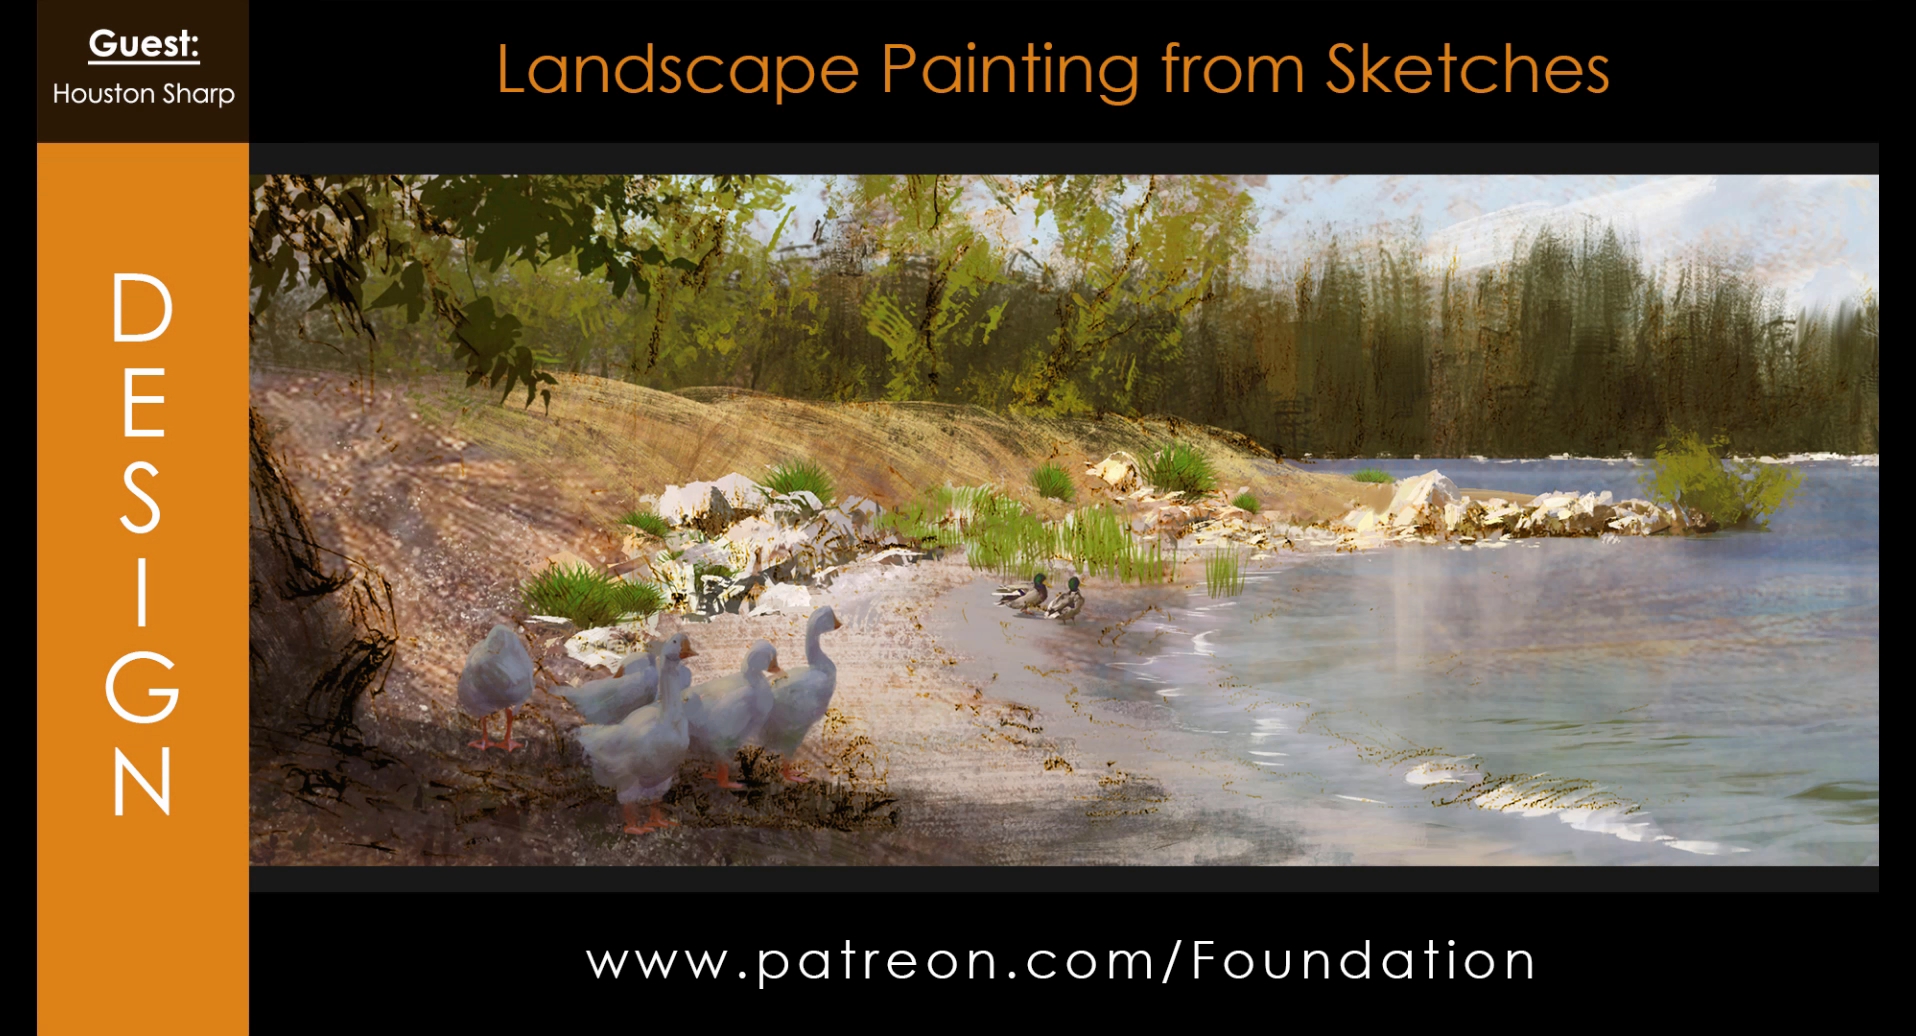 Landscape Painting from Sketches with Houston Sharp